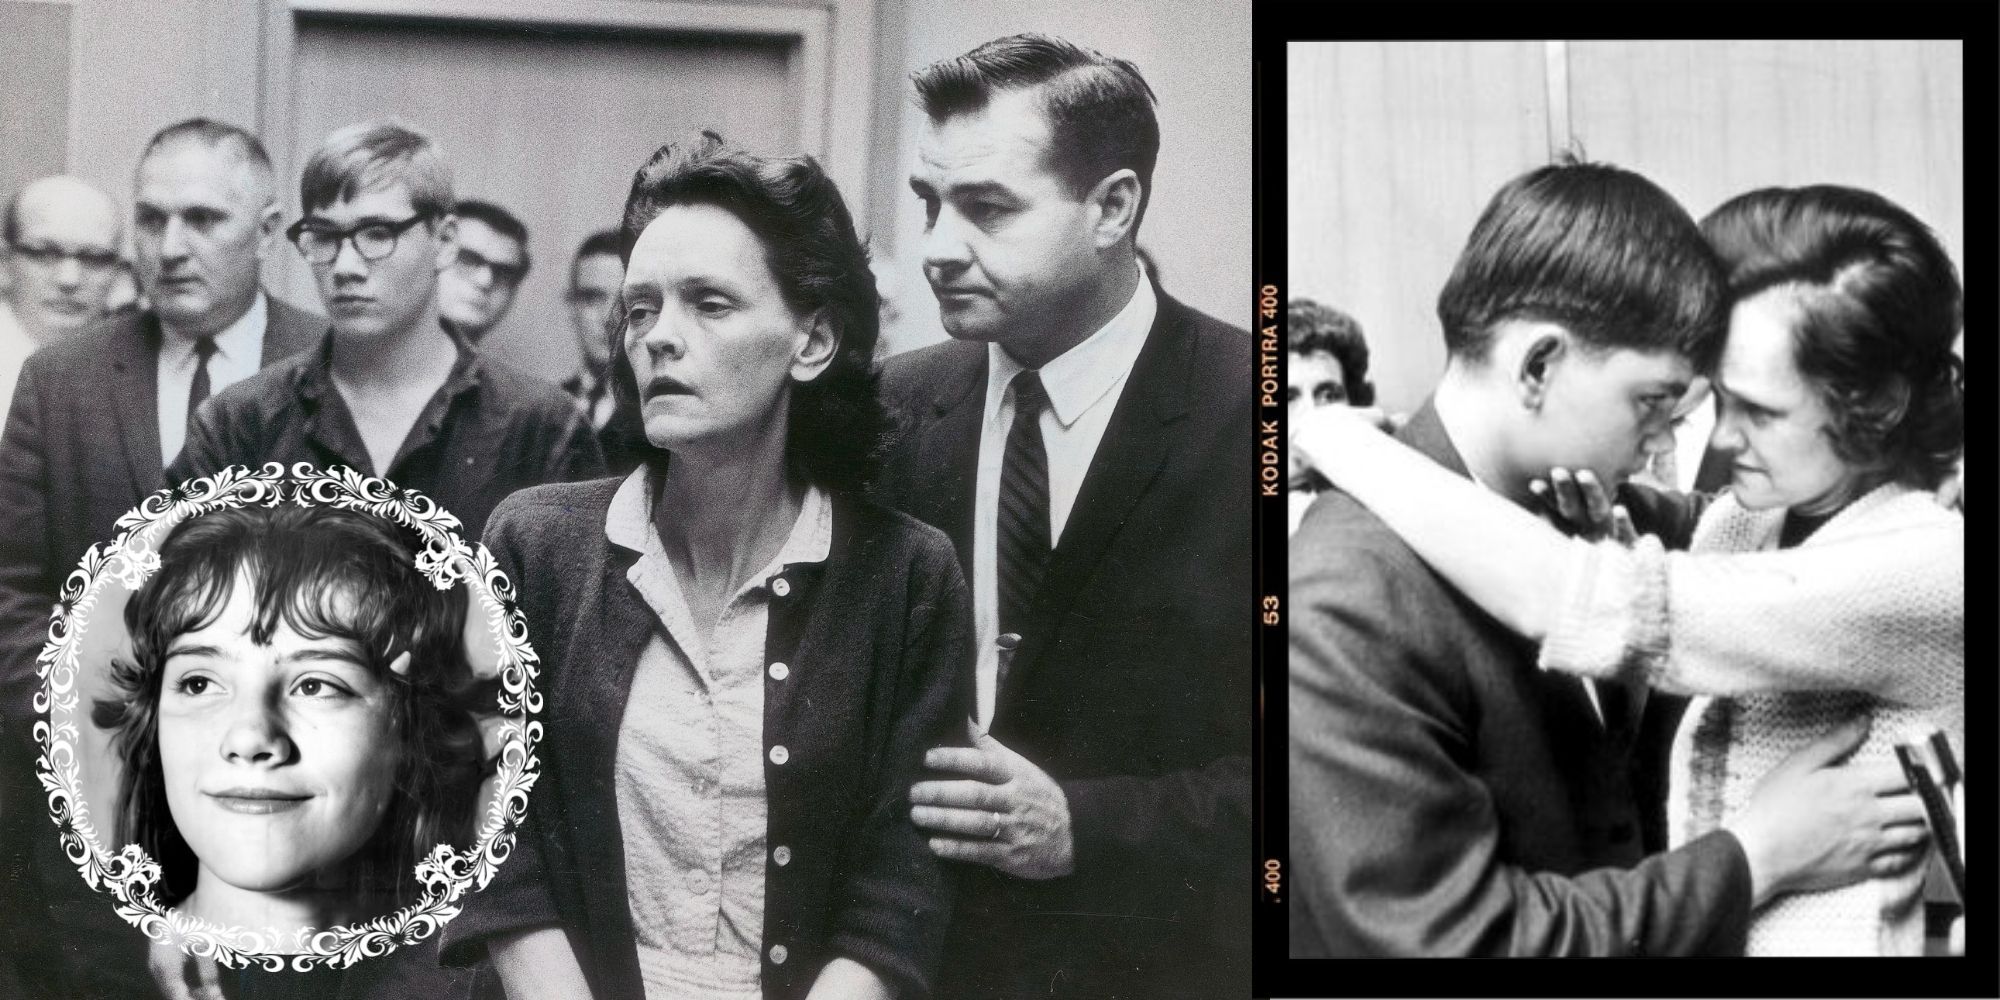 Gertrude Baniszewski American Murderer at her trial, comforting her son, their victim Sylvia Likens on left